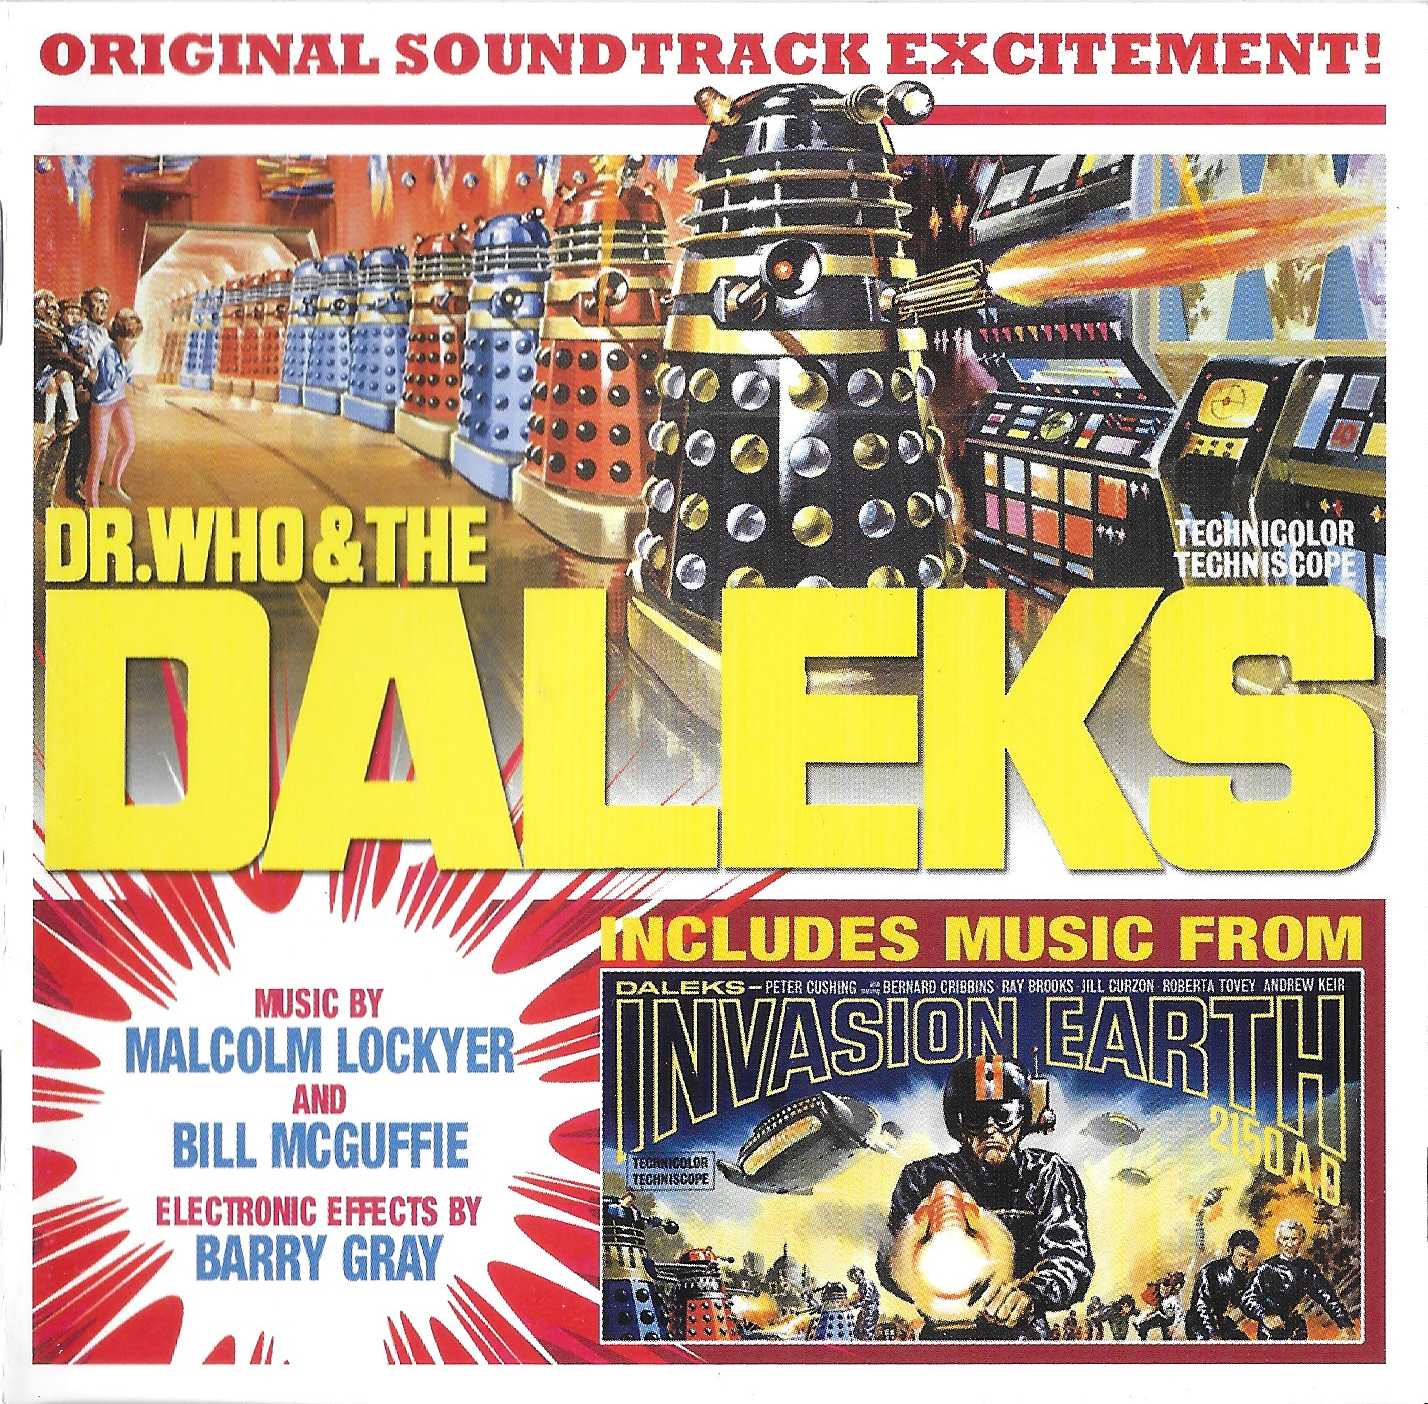 Picture of SILCD 1244 Doctor Who and the Daleks / Daleks invasion Earth 2150 AD by artist Malcolm Lockyer / Bill McGuffie / Barry Gray from the BBC records and Tapes library